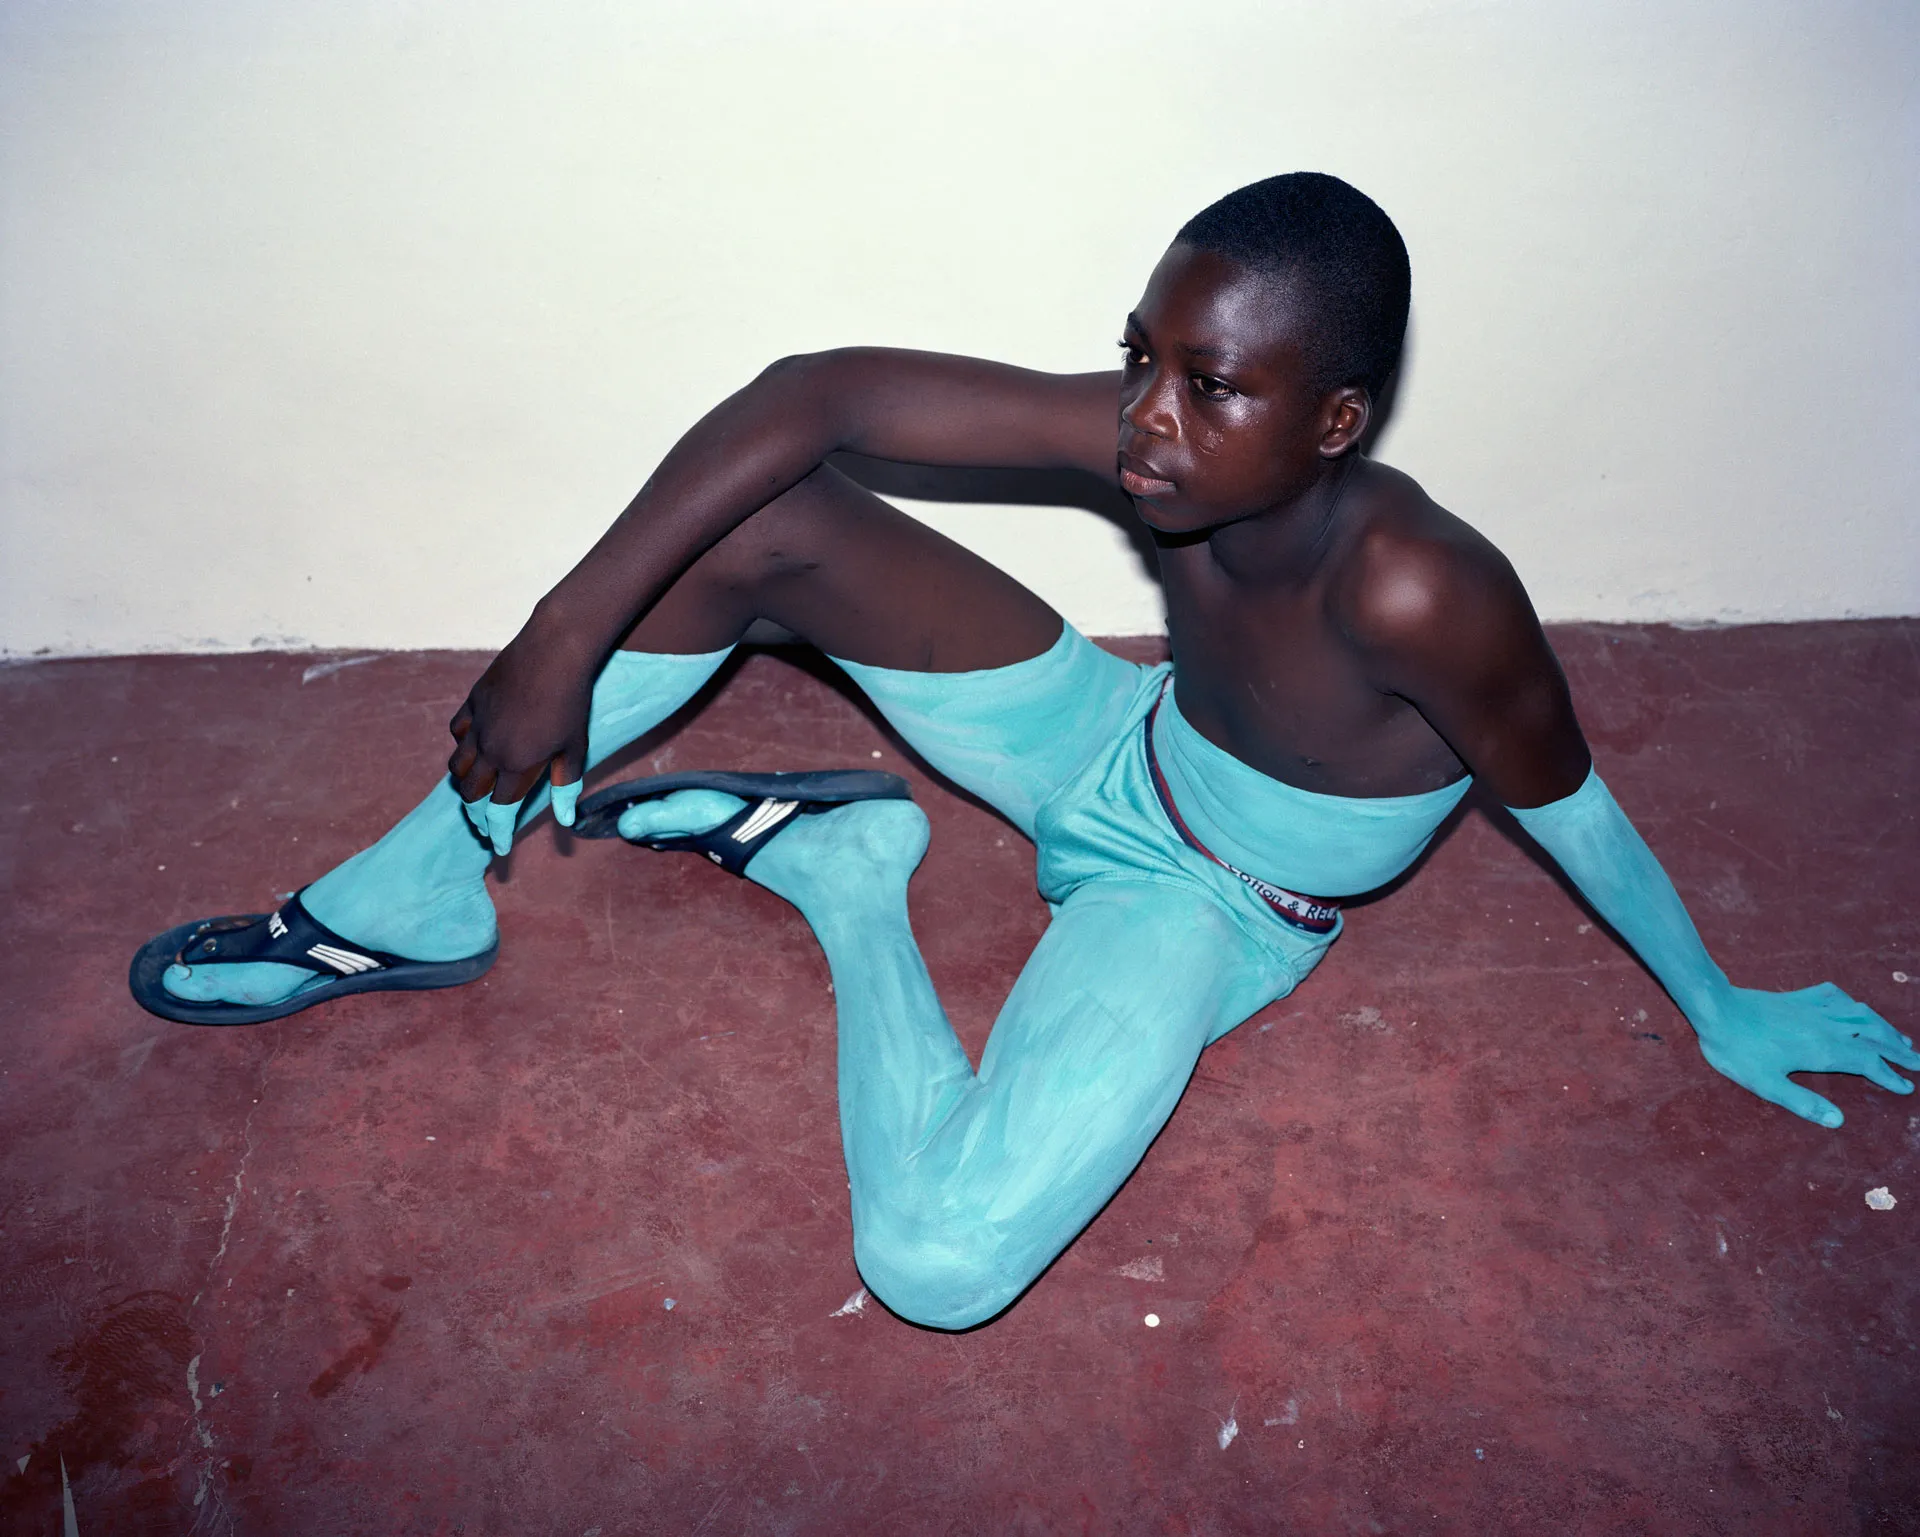 Magical Thinking: An interview with Viviane Sassen on the occasion